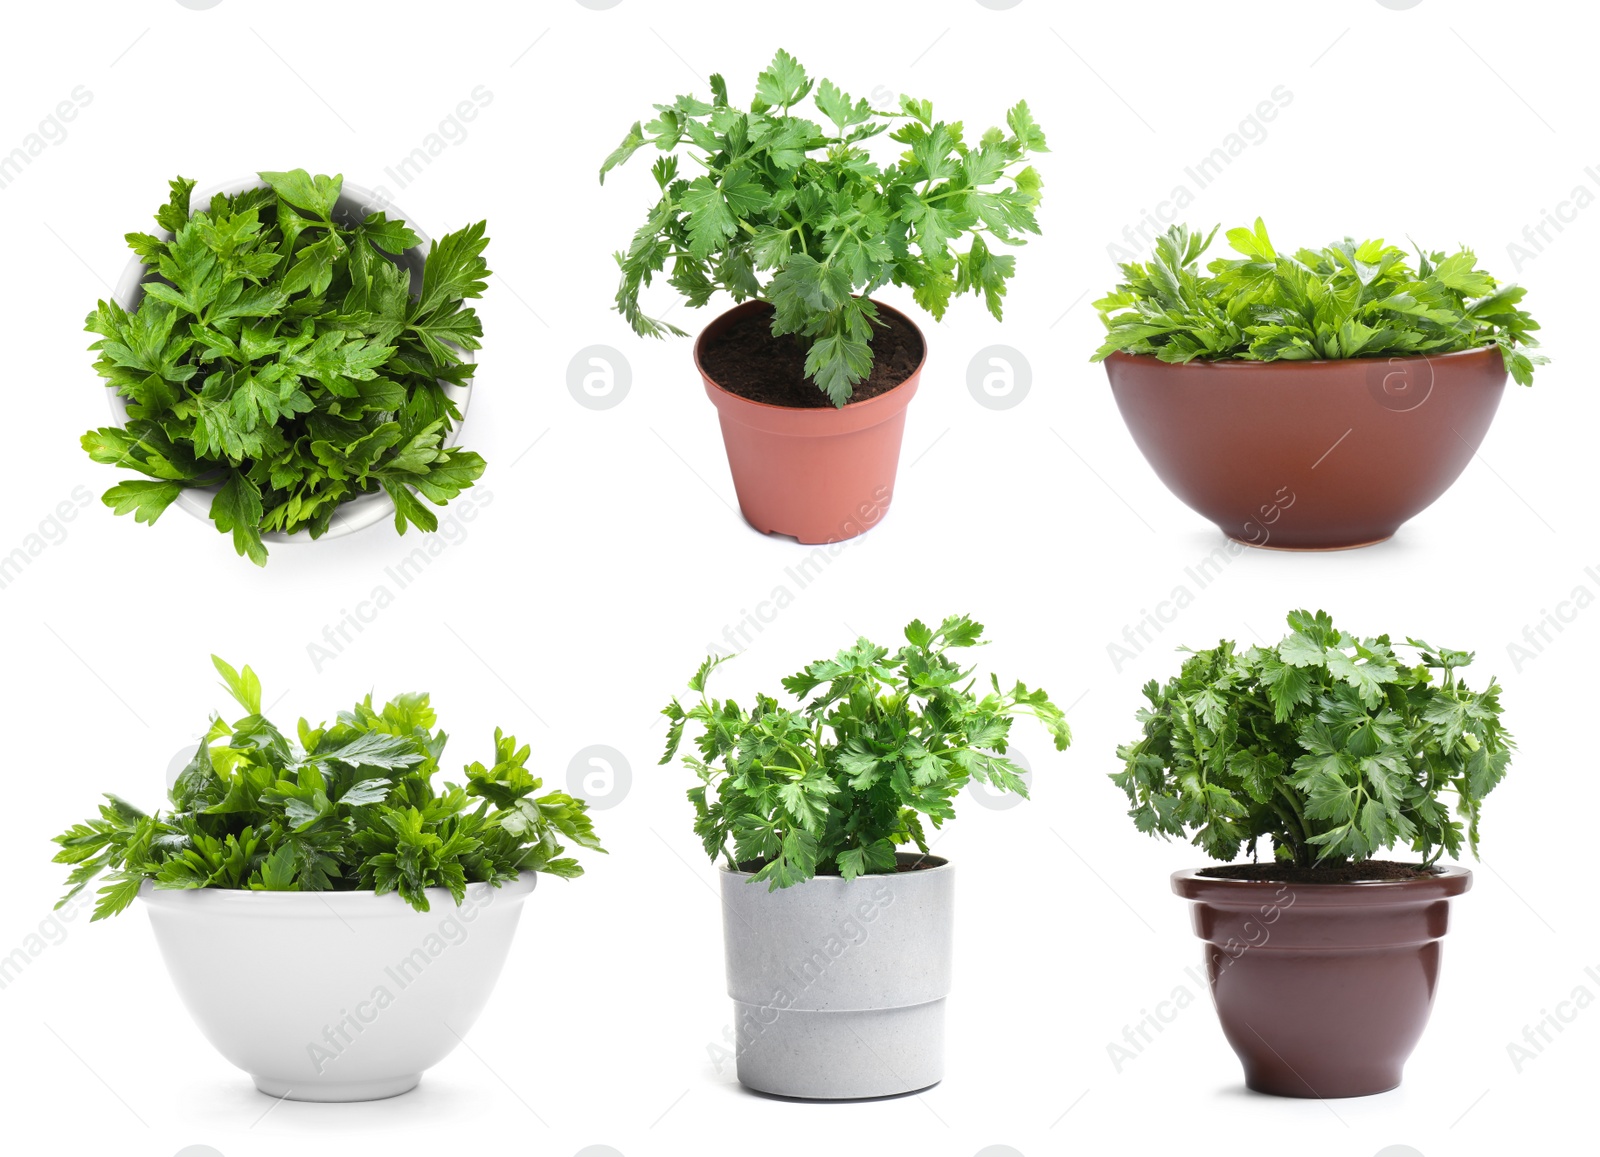 Image of Set with potted parsley plants on white background